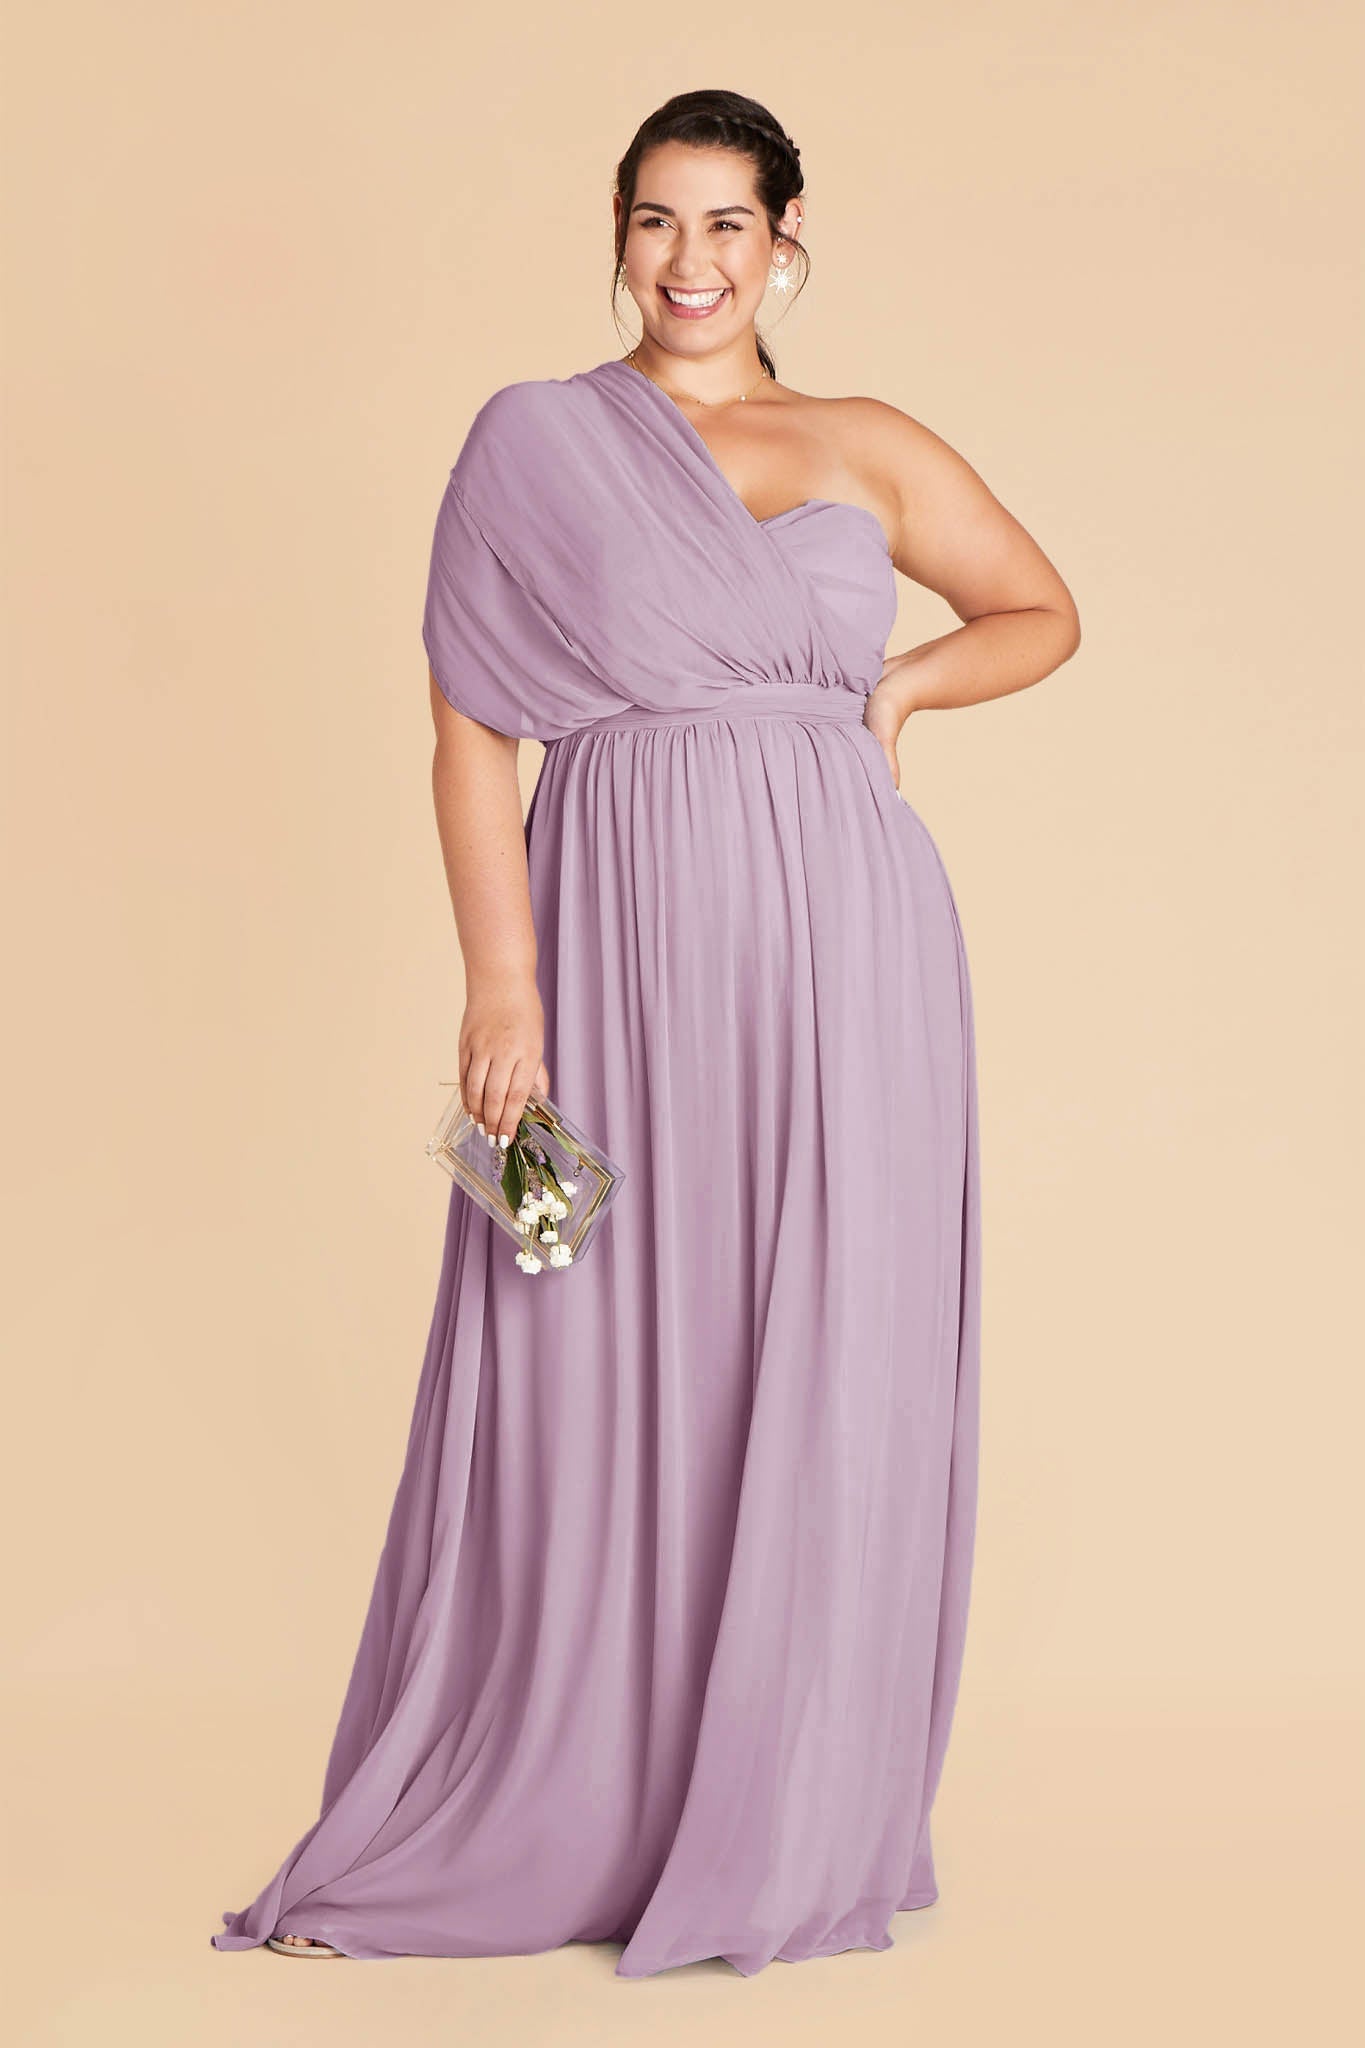 Grace plus size convertible bridesmaid dress in Lavender Chiffon by Birdy Grey, front view